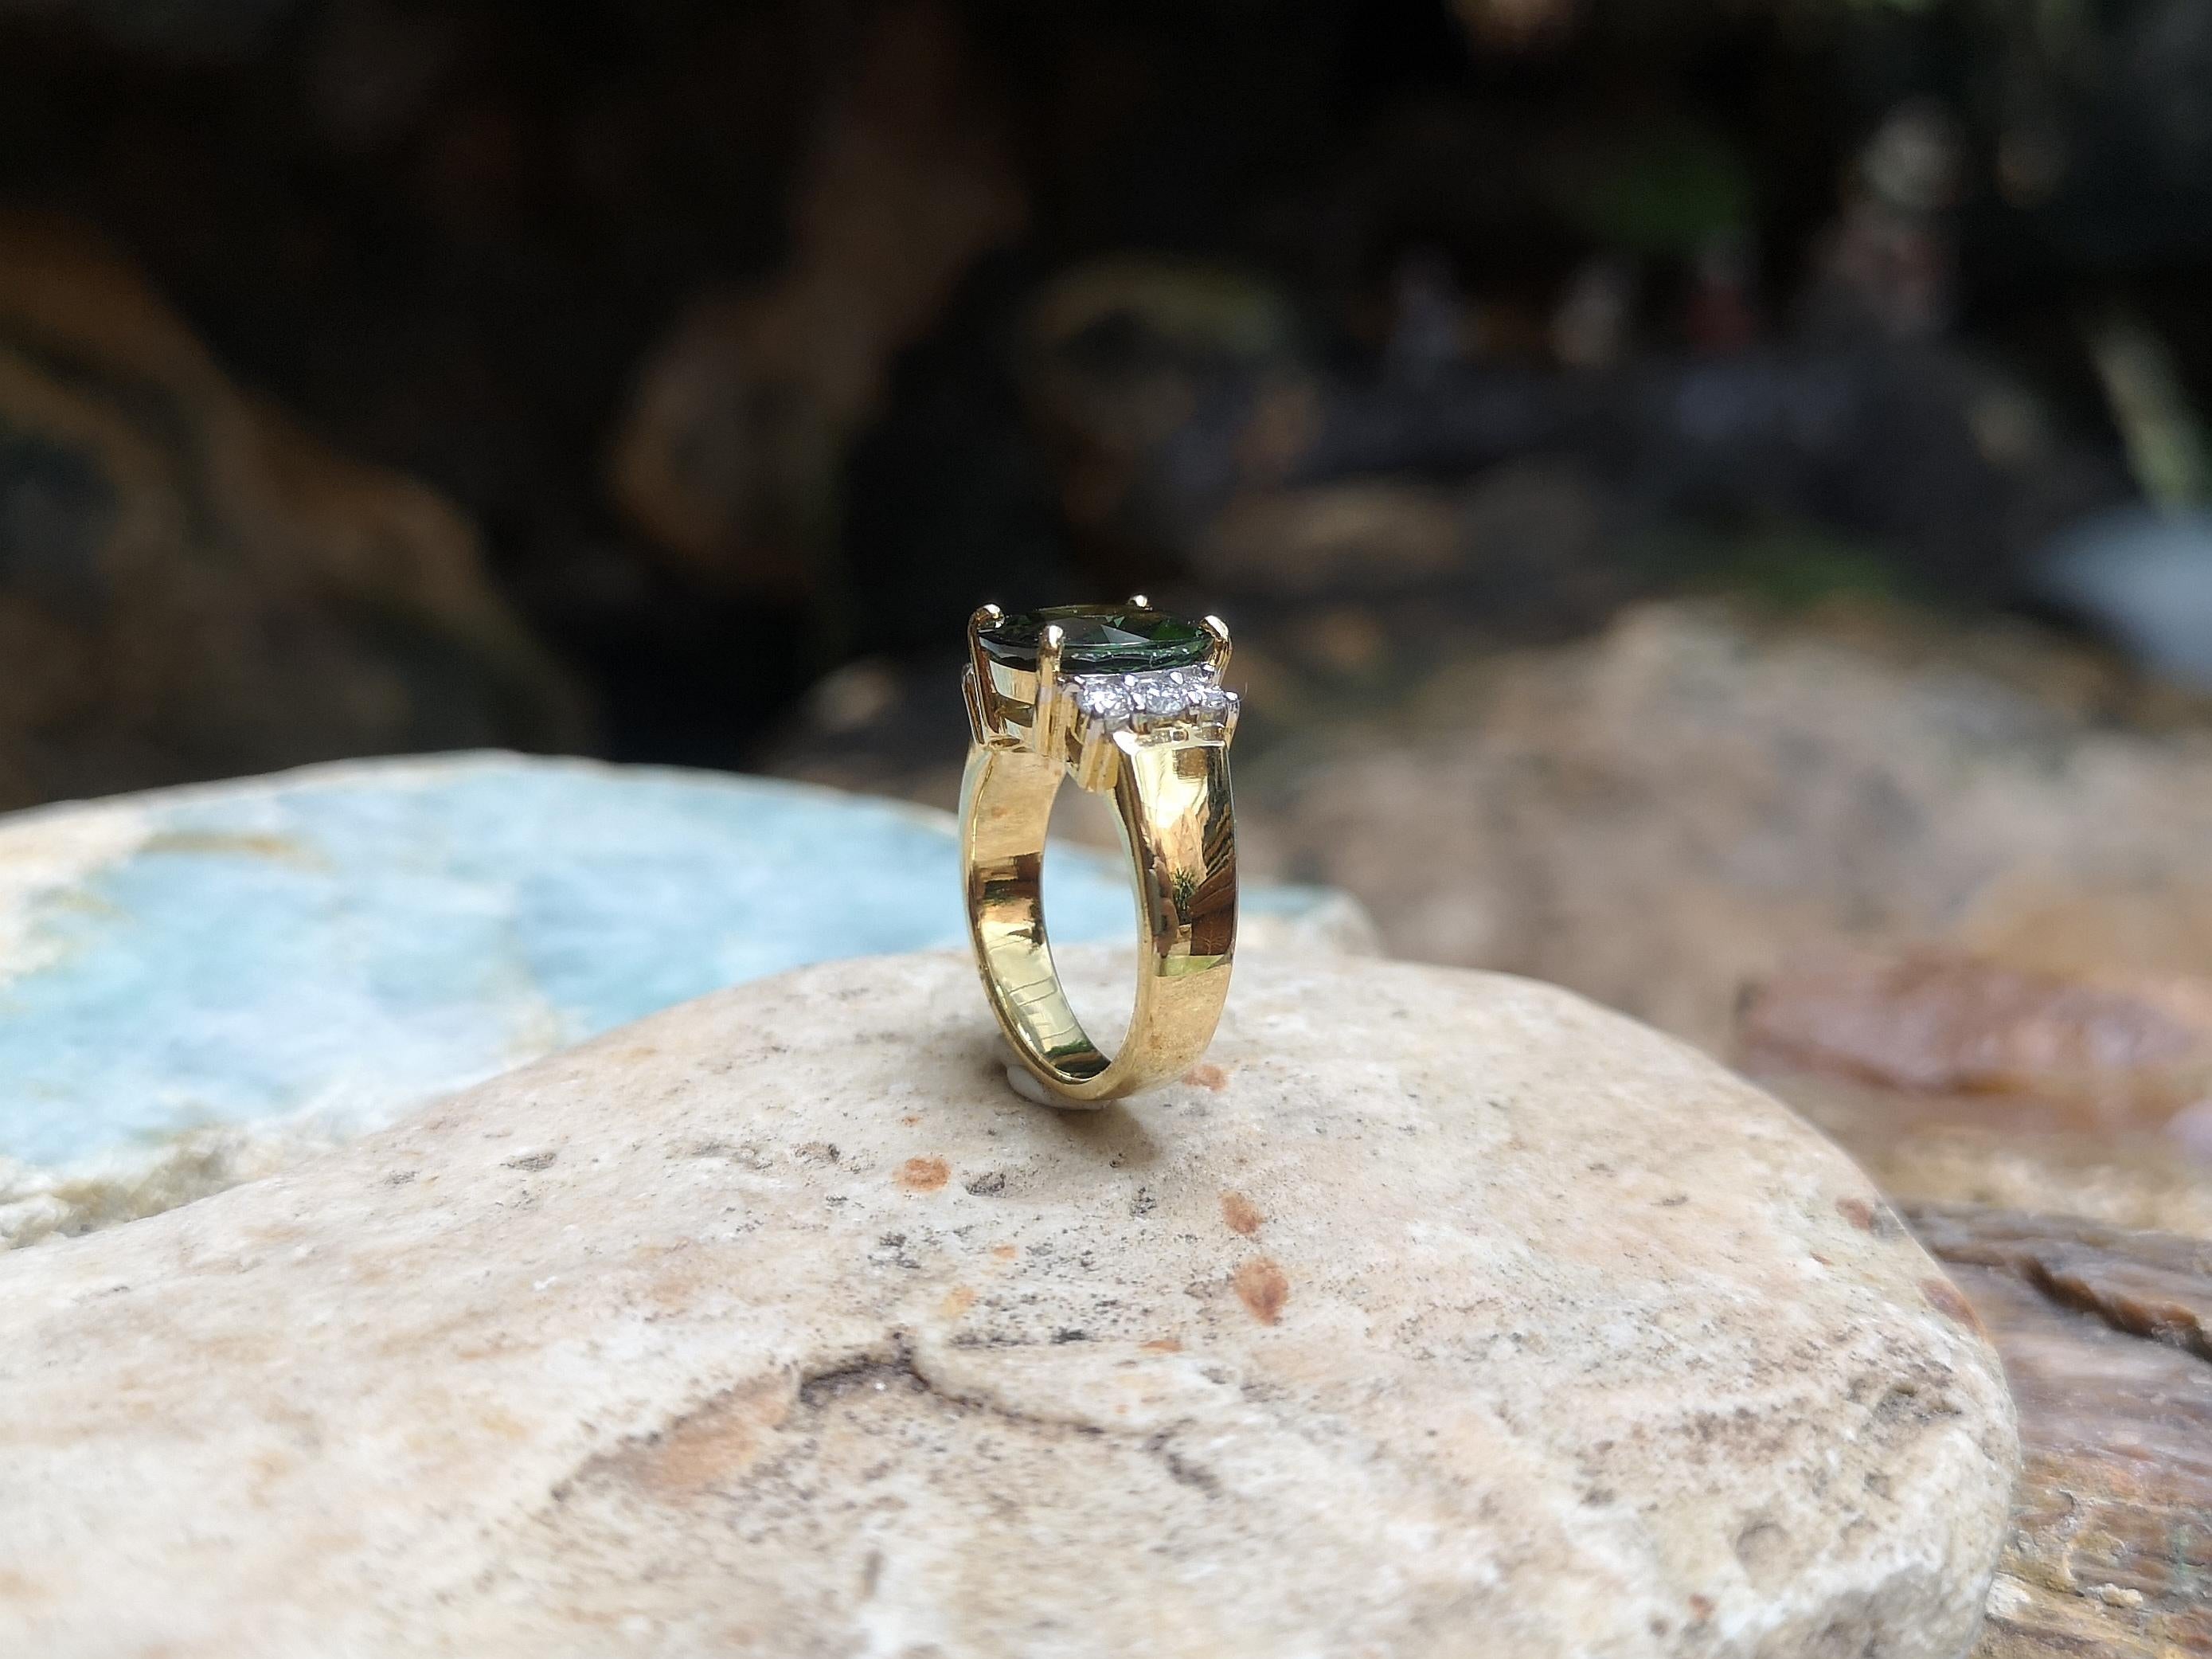 Green Sapphire with Diamond Ring Set in 18 Karat Gold Settings For Sale 2